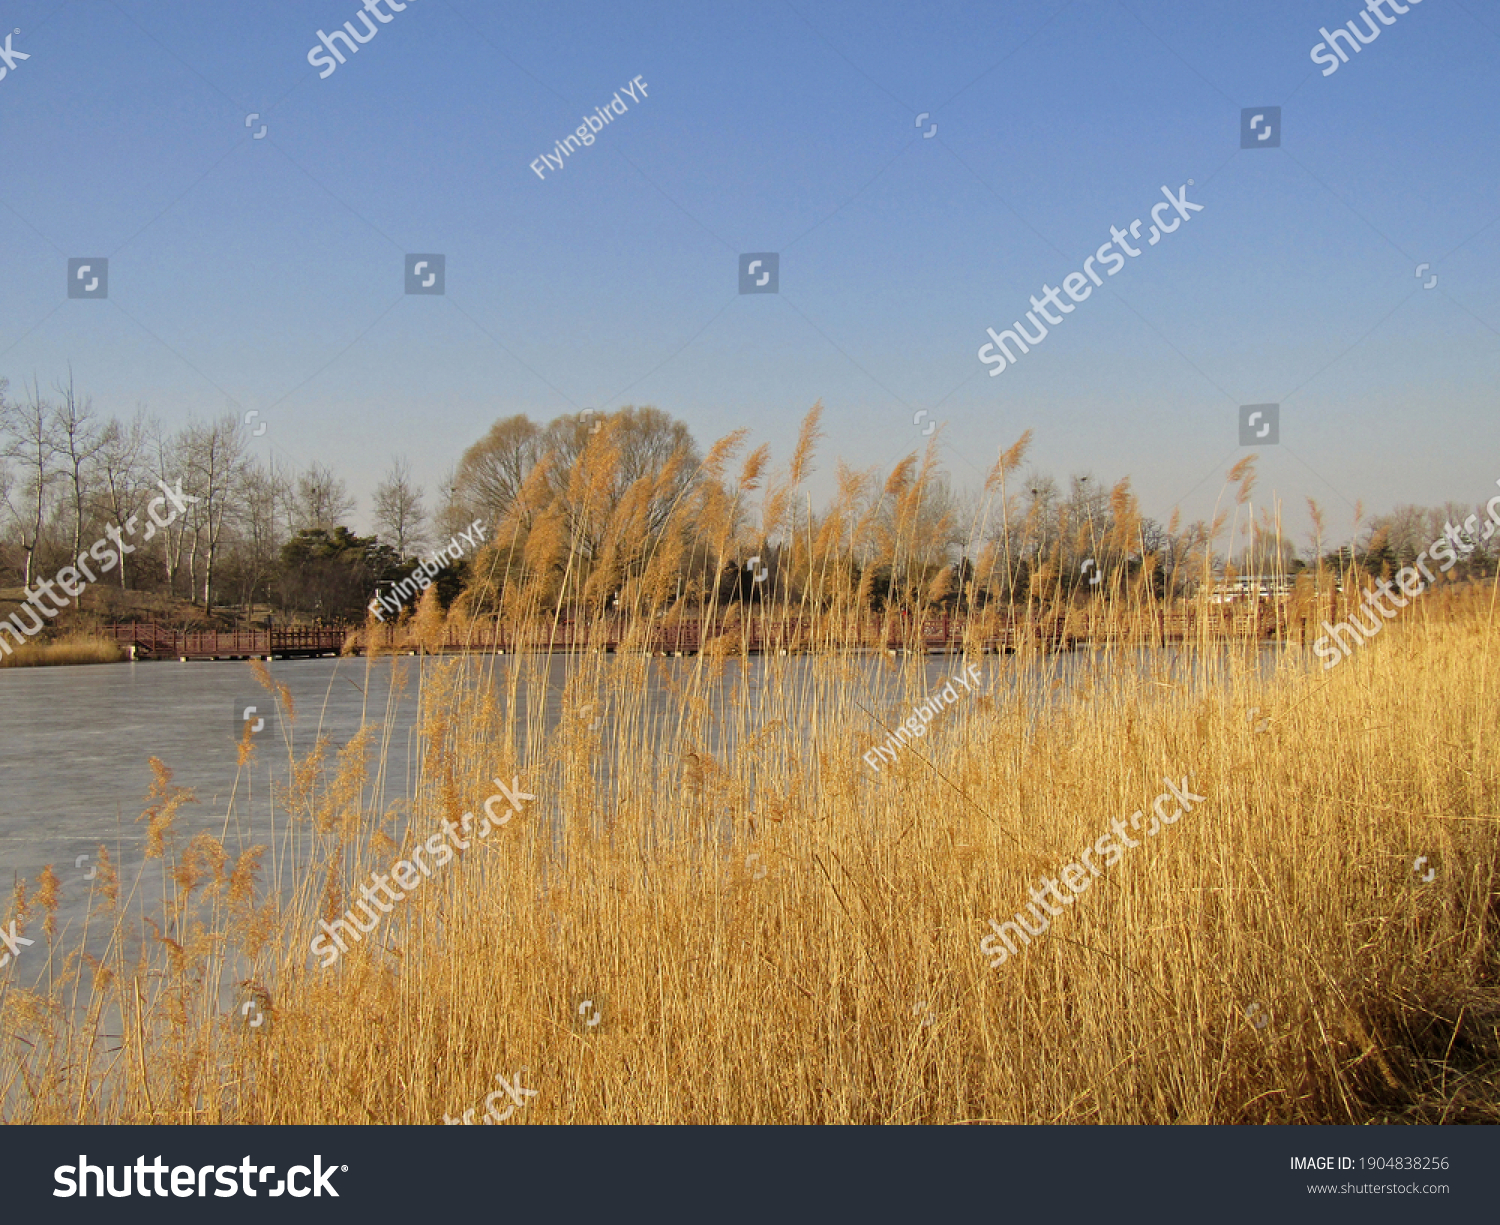 Beautiful scenic view of yellow reeds clusters growing on lakeside, with wooden bridge over icy lake and leafless trees on the other lakeside under clear blue sky in winter in Beijing, China #1904838256